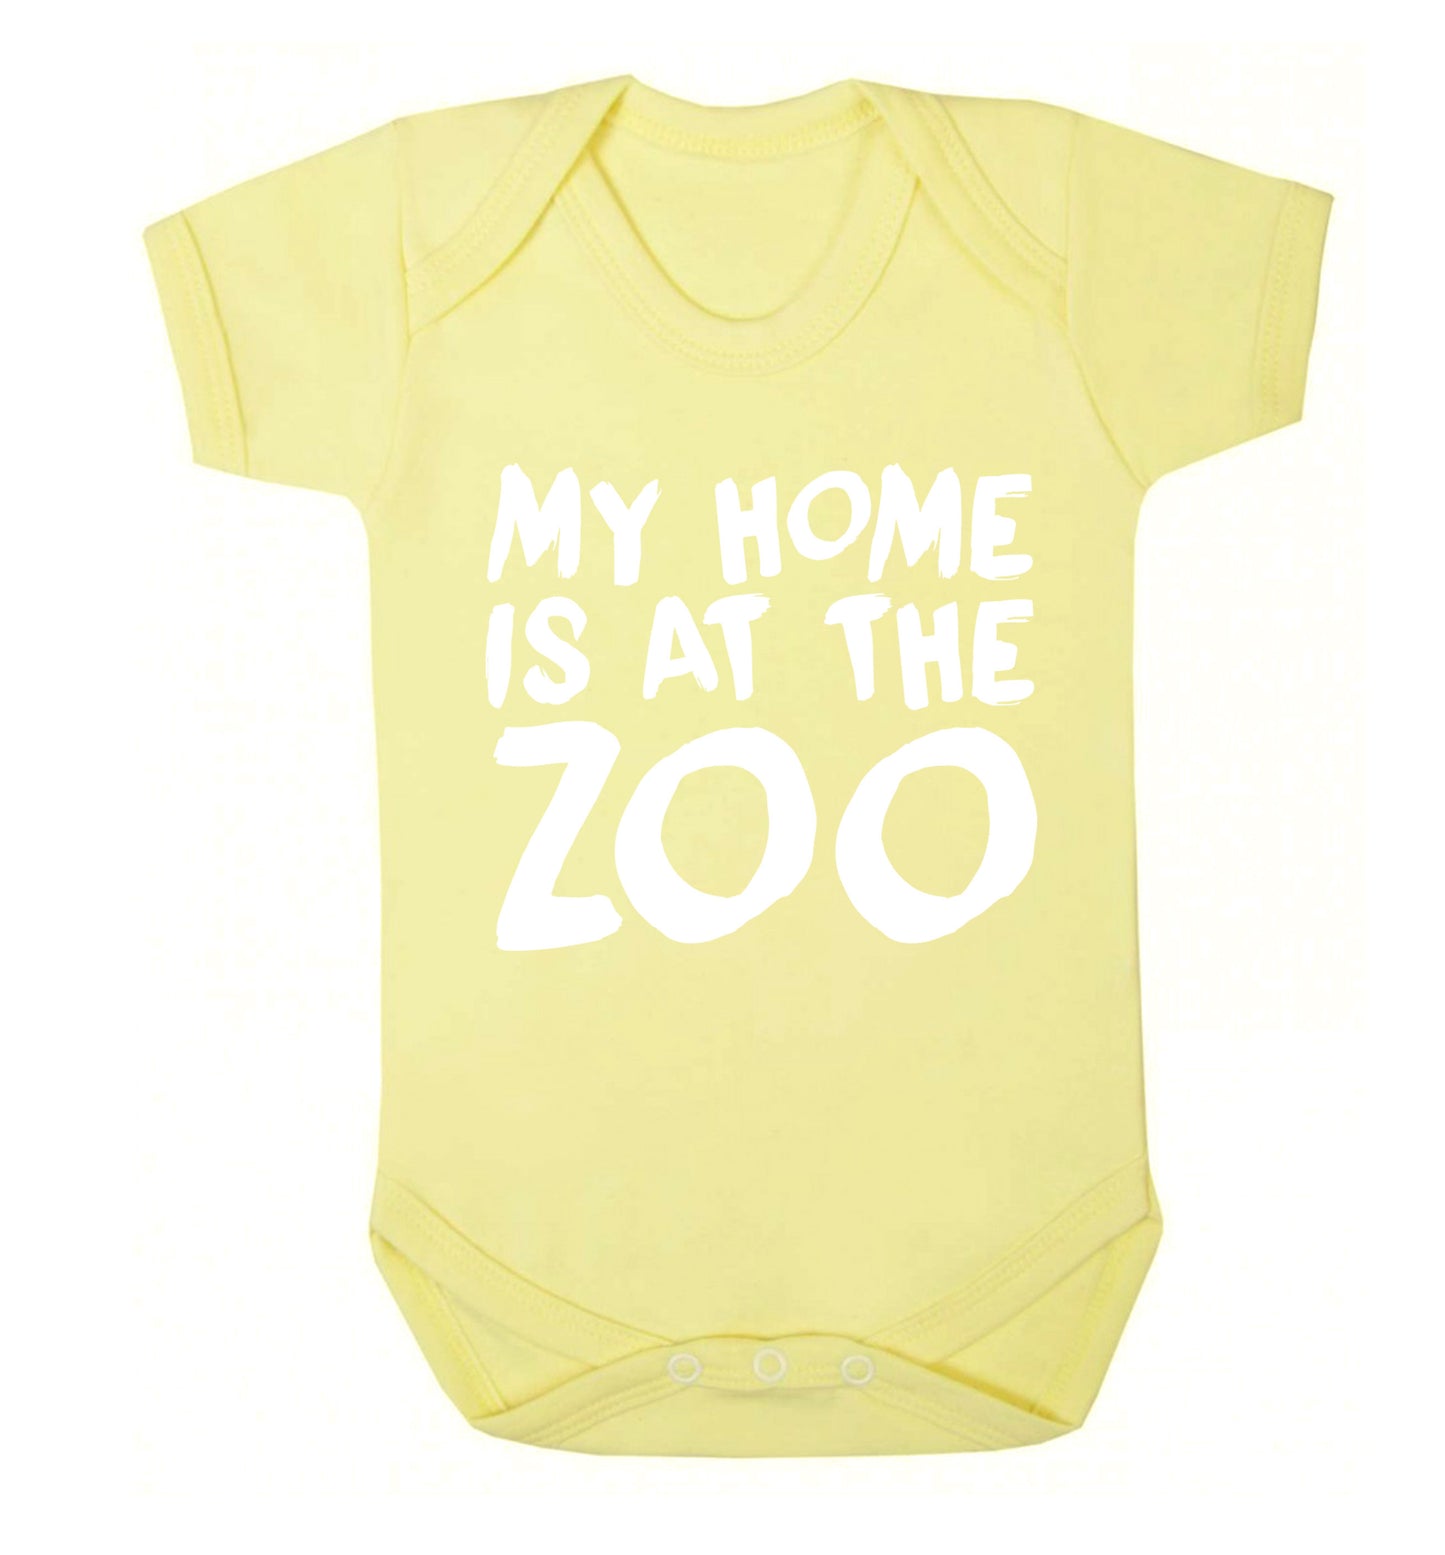 My home is at the zoo Baby Vest pale yellow 18-24 months